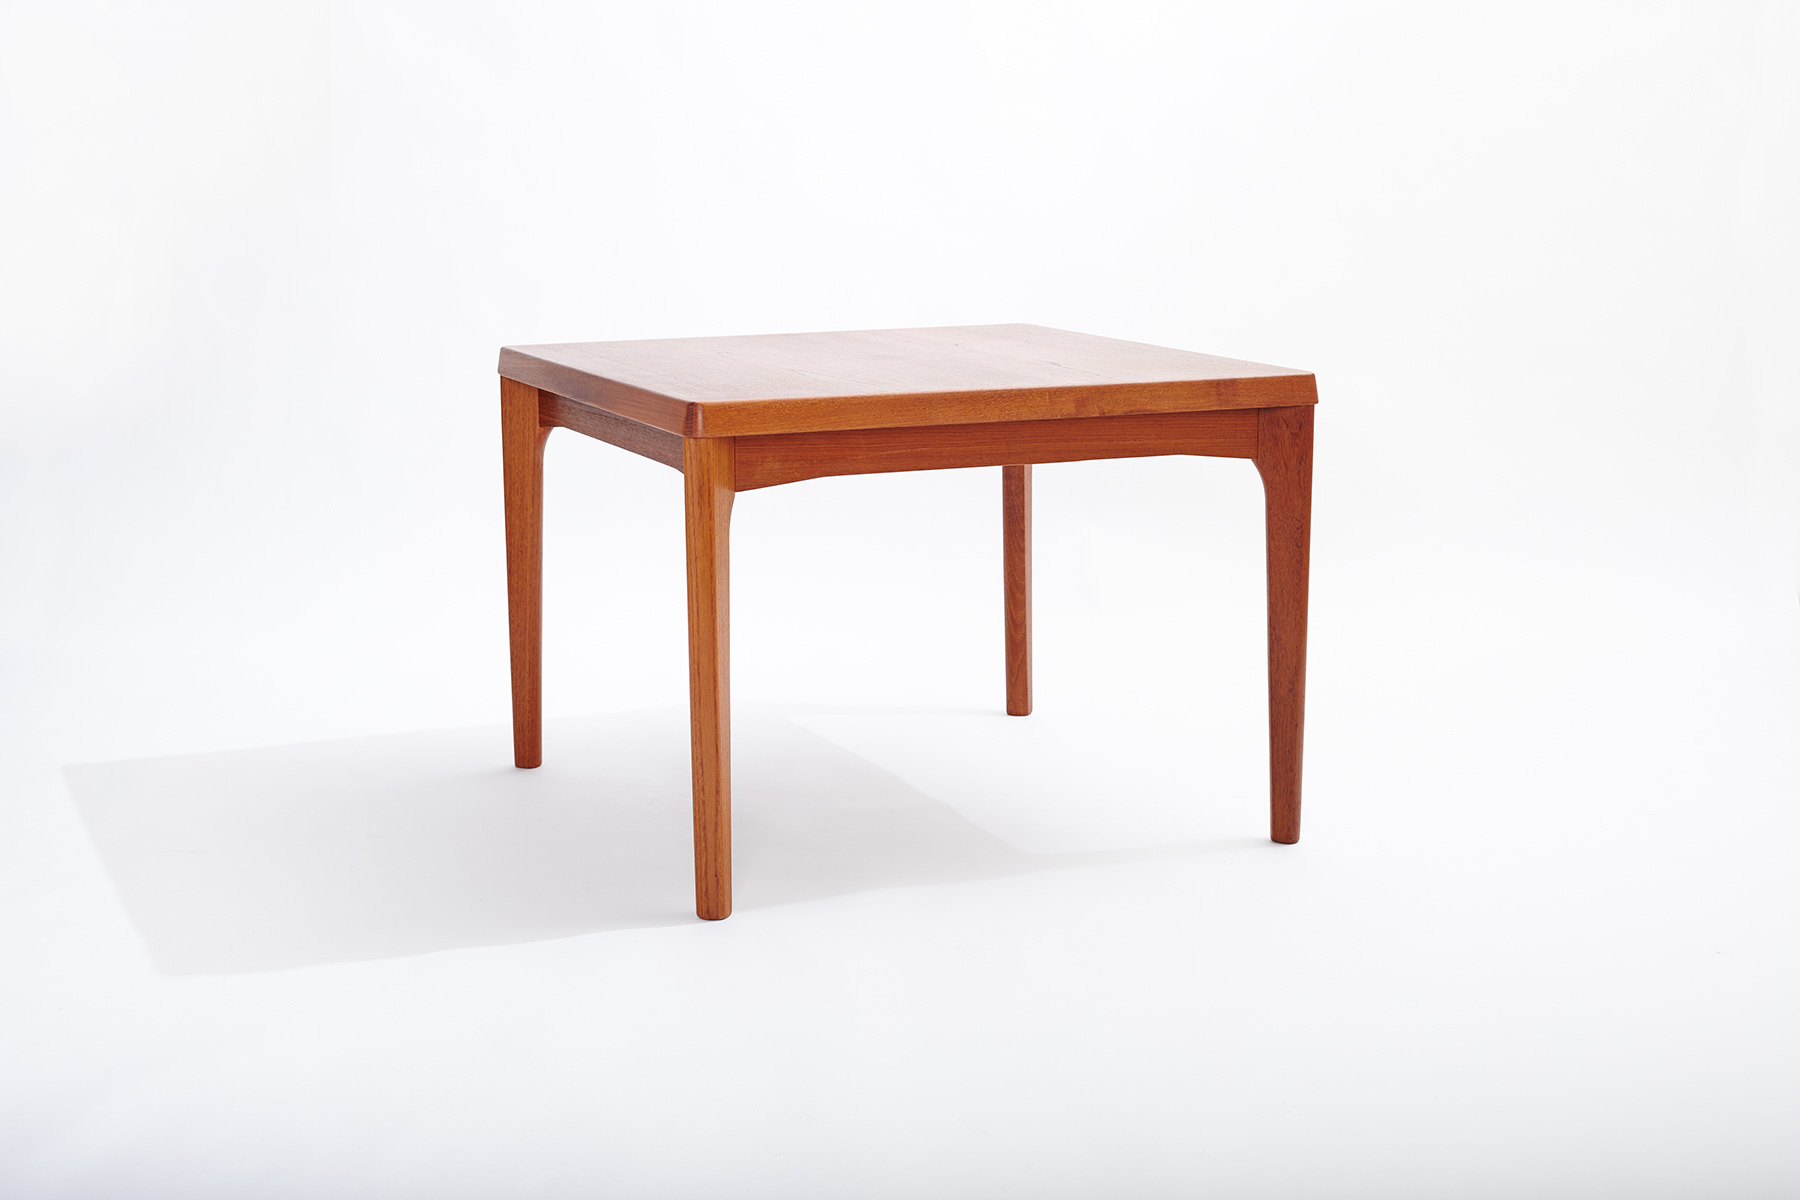 yw_henry_kjaernulf_side_table_angle_right